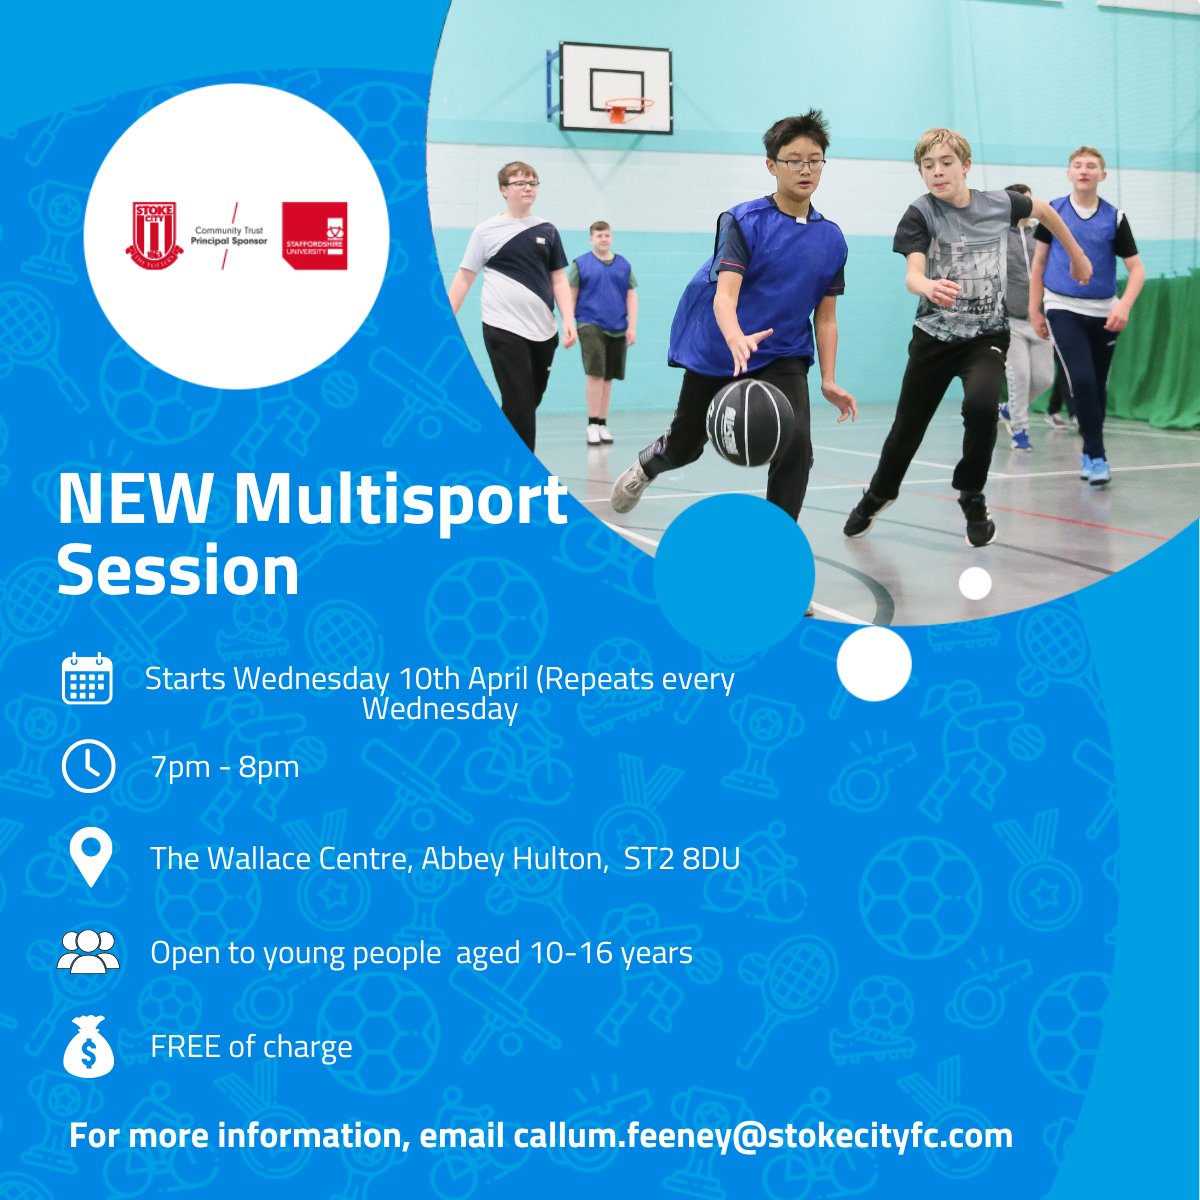 Today is the day... The start of our new youth engagement session at the Wallace Centre in Abbey Hulton! 😍 We want to see as many new faces as possible so if you know a young person who would love this, send them along tonight and they won't regret it! 🎉 See you there! 😎❤️🤍